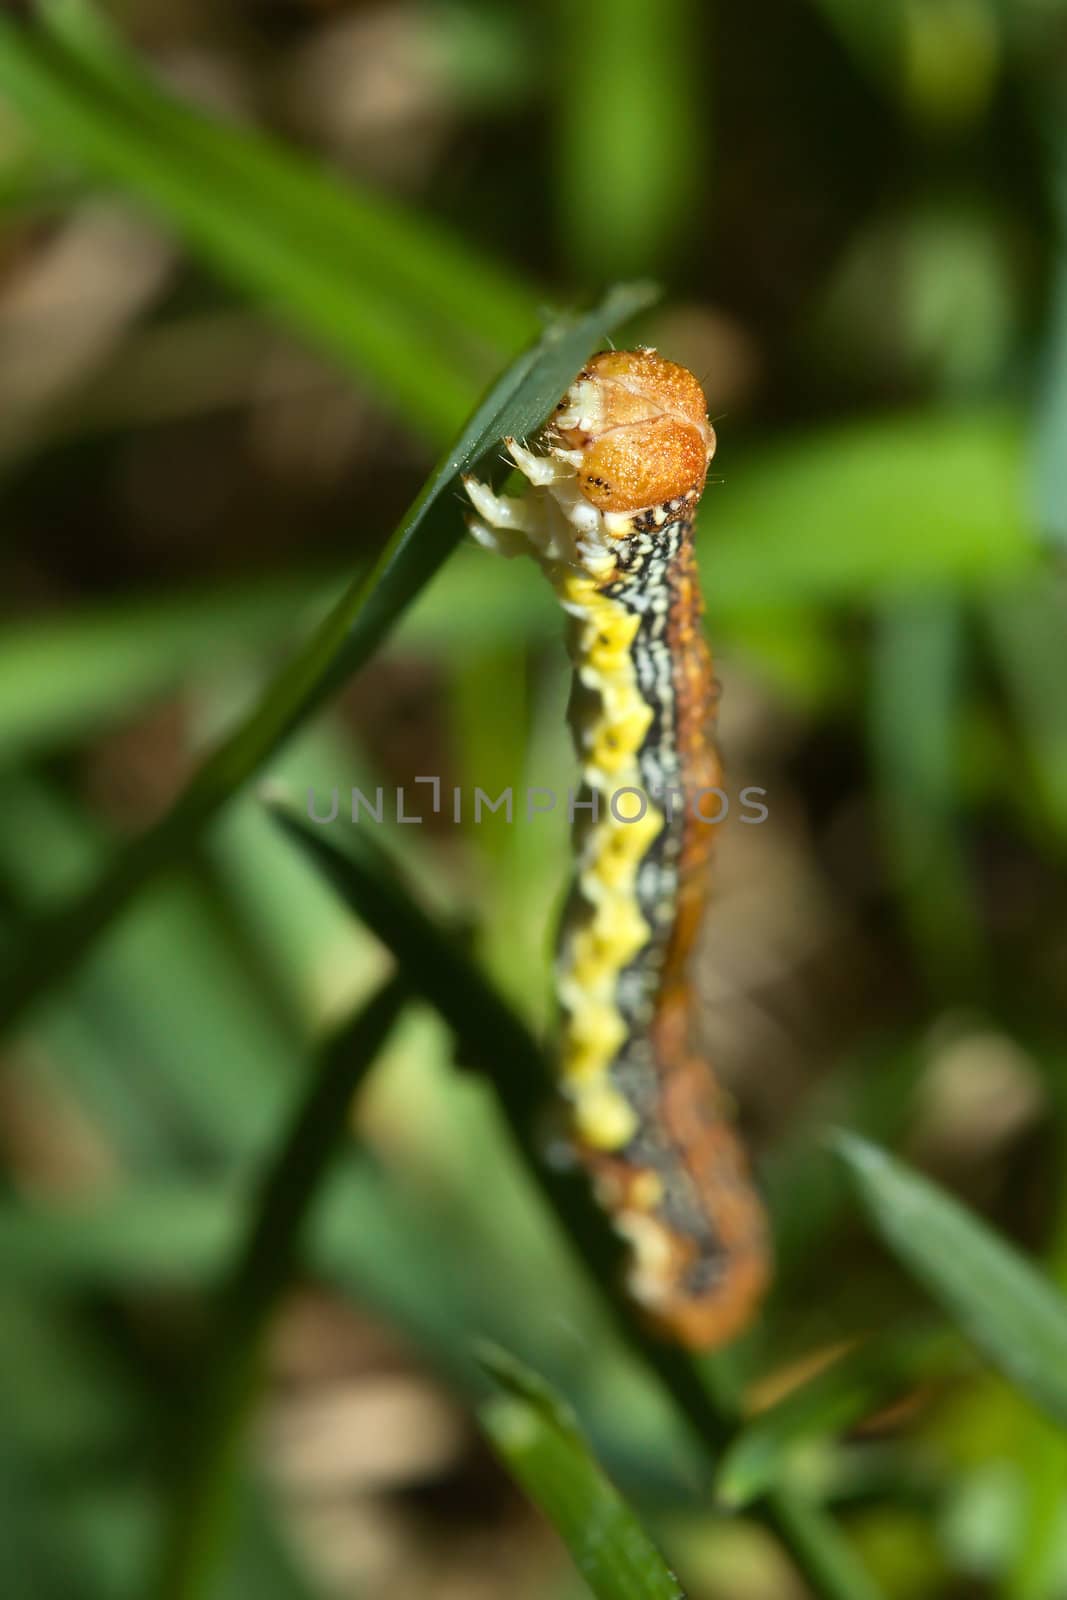 Inch Worm Hanging On to a blade of grass.